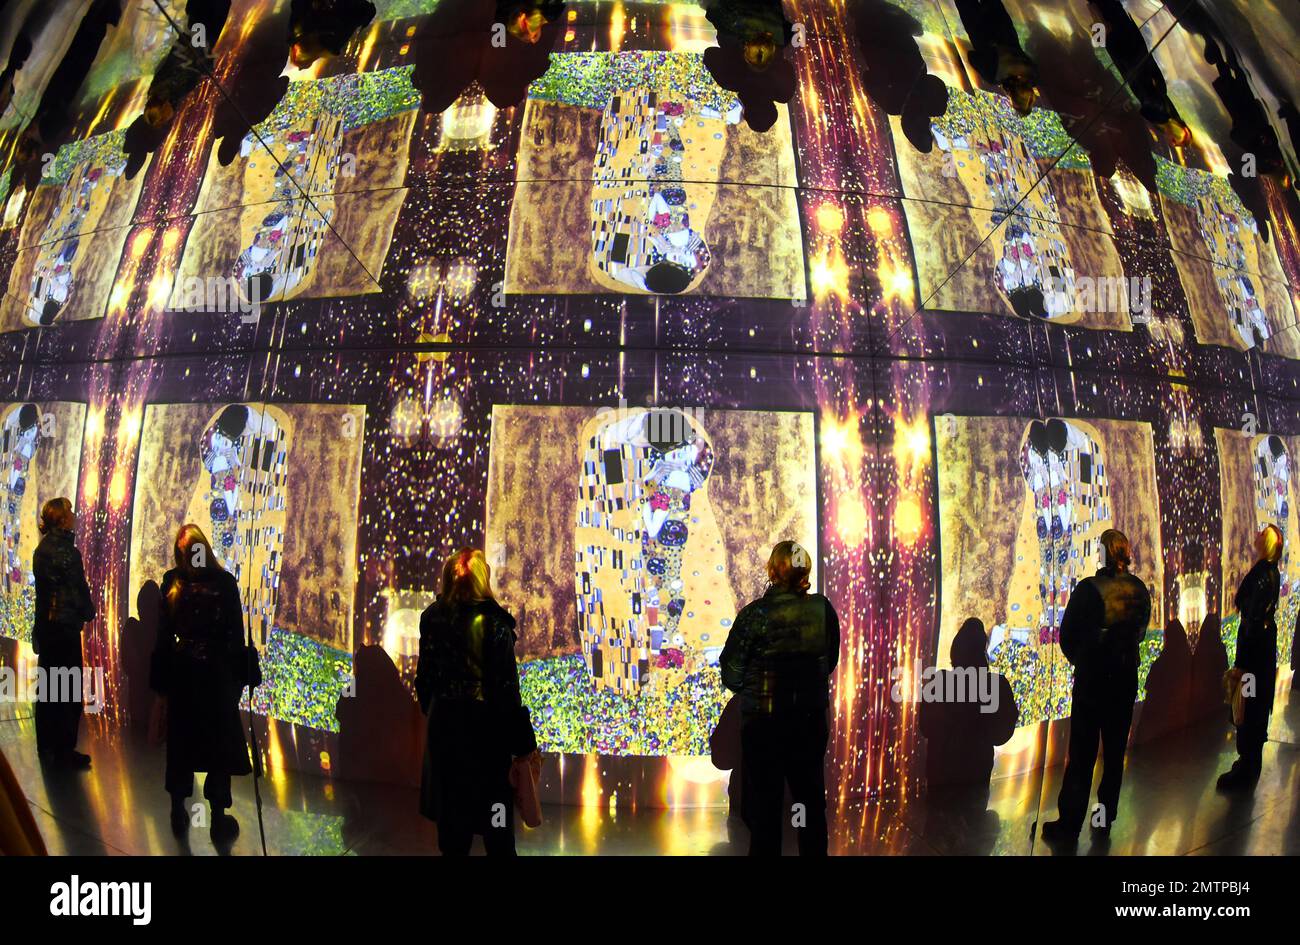 29 January 2023, Saxony, Leipzig: In the Kunstkraftwerk, a former combined heat and power plant, visitors stand in a hall of mirrors, in which the famous painting 'Kiss' is also reflected several times. The mirrored room is part of the multimedia installation 'Gustav Klimt - GoldExperience', in which many famous paintings are projected in the room. In the show by Italian Stefano Fake and his Fake Factory, the stations of Austrian artist Gustav Klimt (1862-1918), who is one of the most important representatives of Viennese Art Nouveau, are shown in different thematic areas as a monumental proje Stock Photo